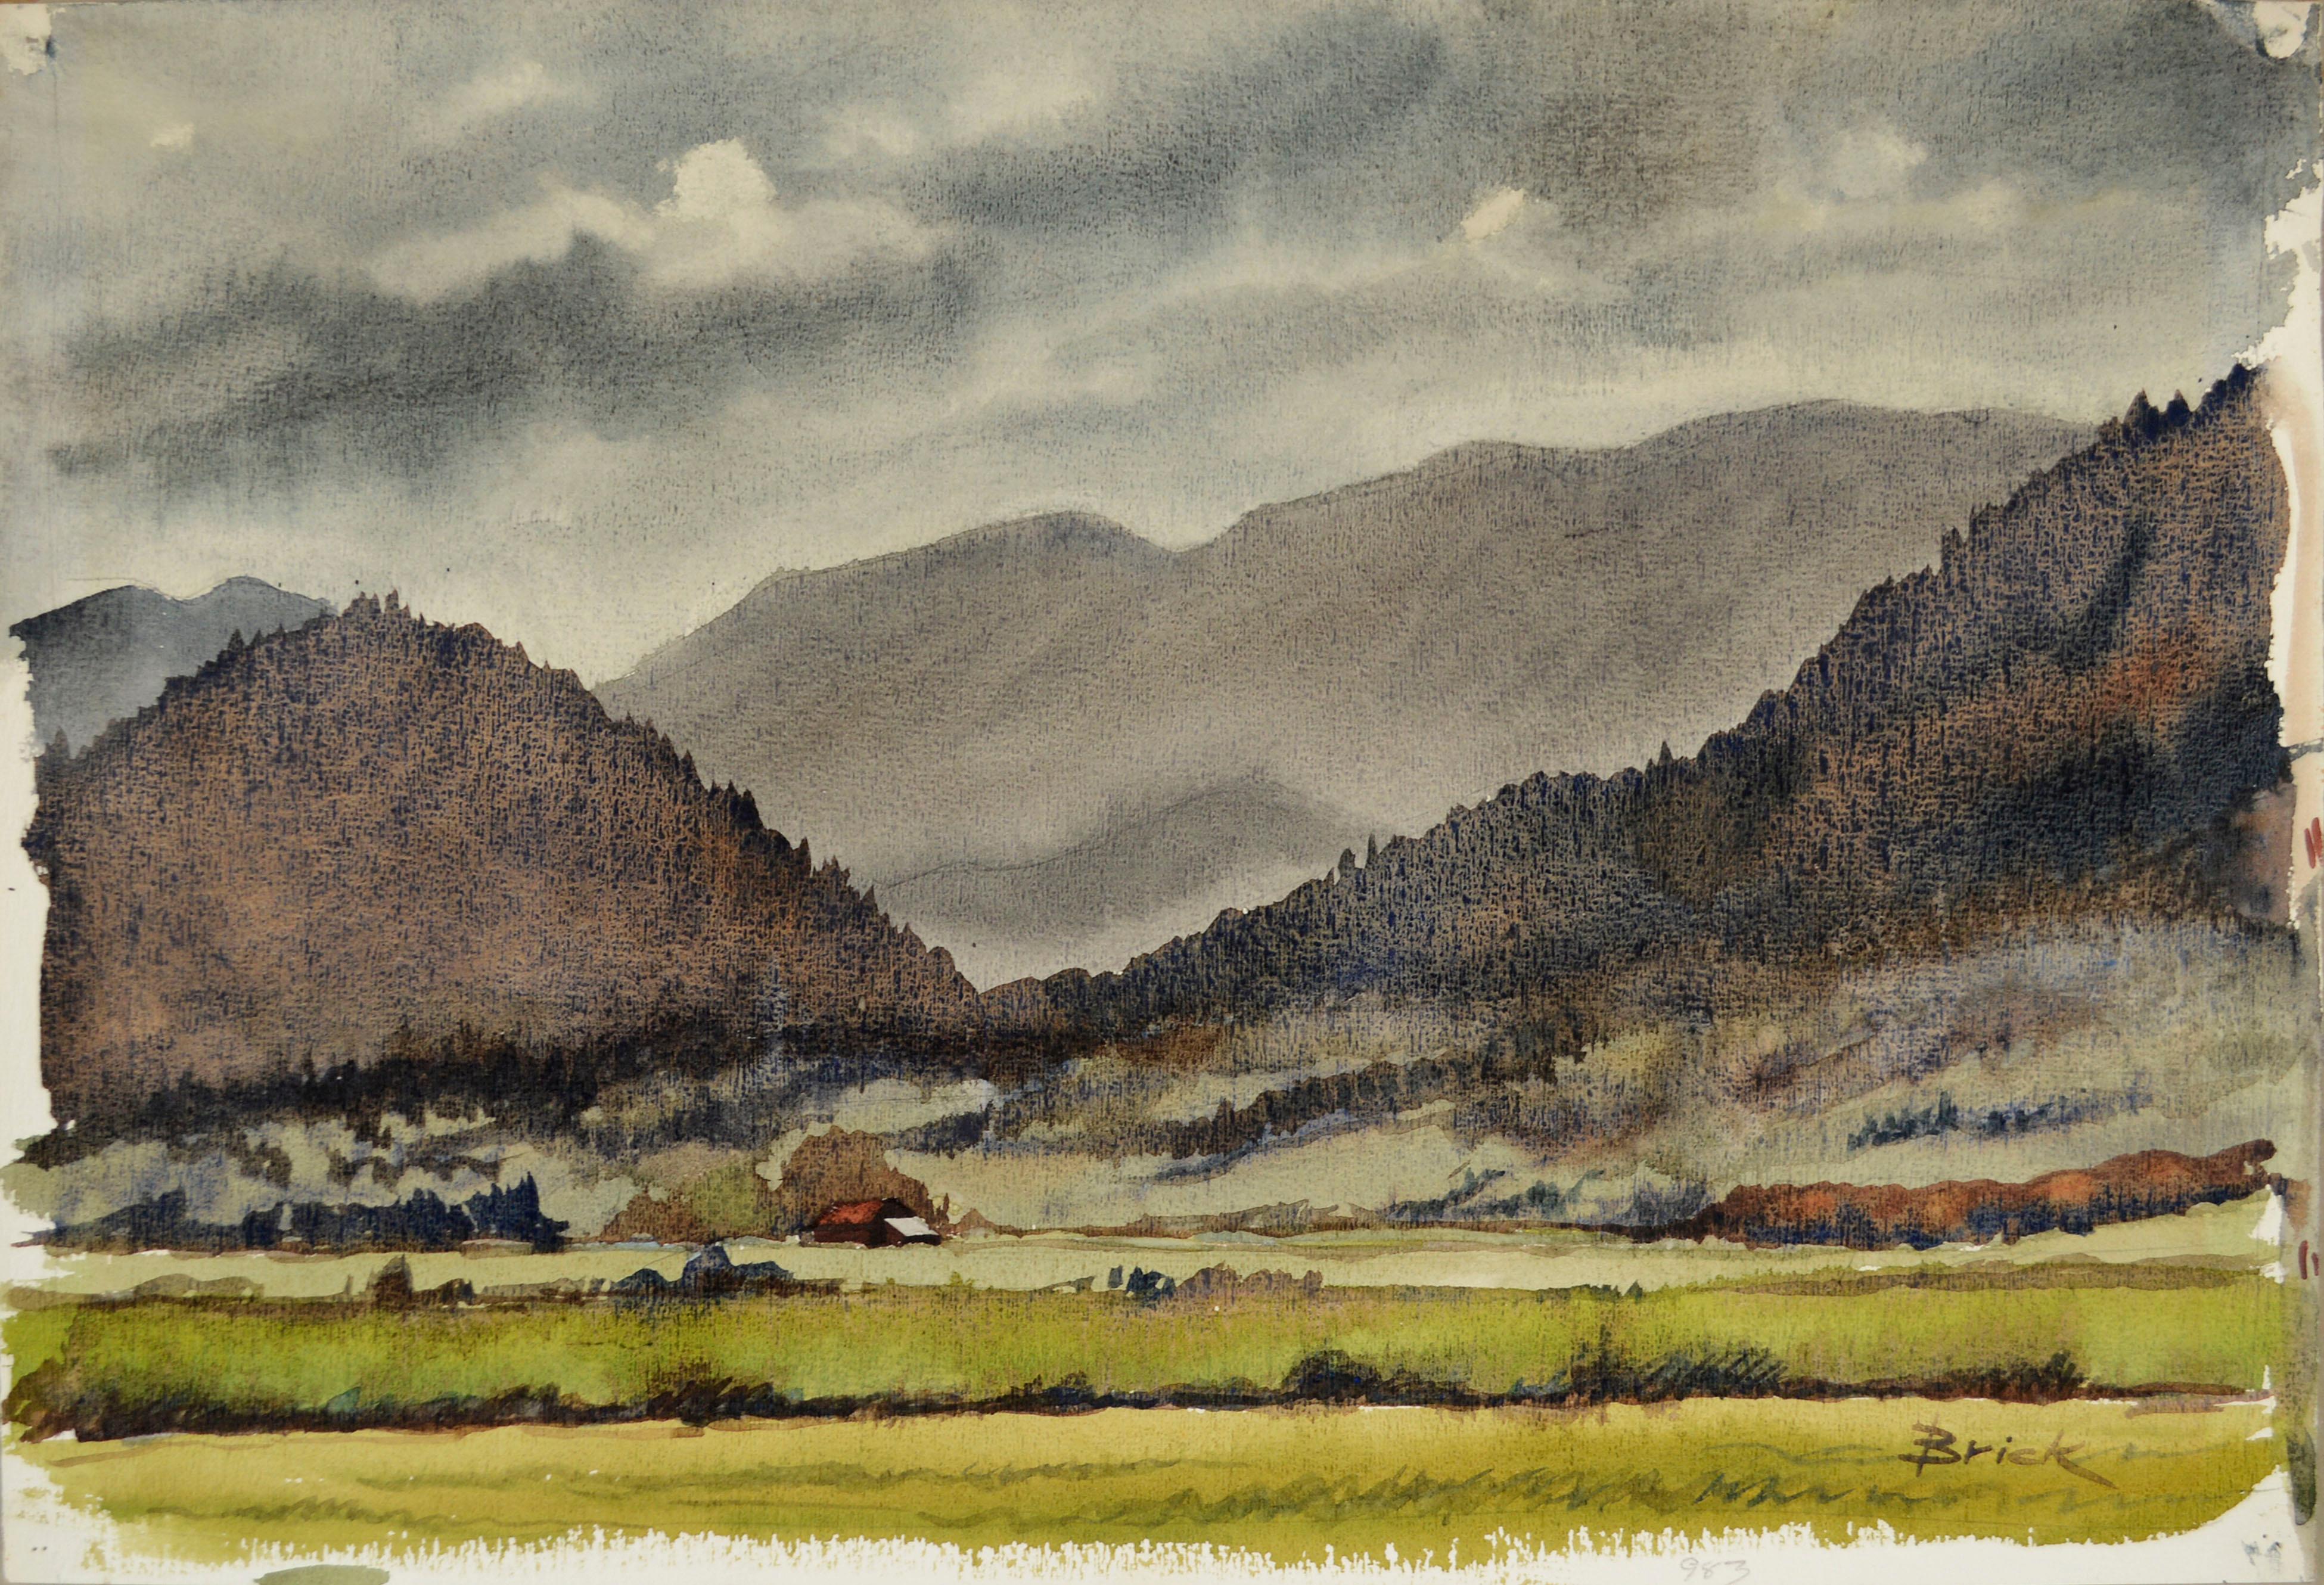 Verdant landscape watercolor of the beautiful Willamette Valley under a cloudy sky by Oregon artist Walter Jim Brick (American, 20th Century). A tiny red farmhouse is nestled beside expansive and dramatic mountains and sky, giving this landscape a